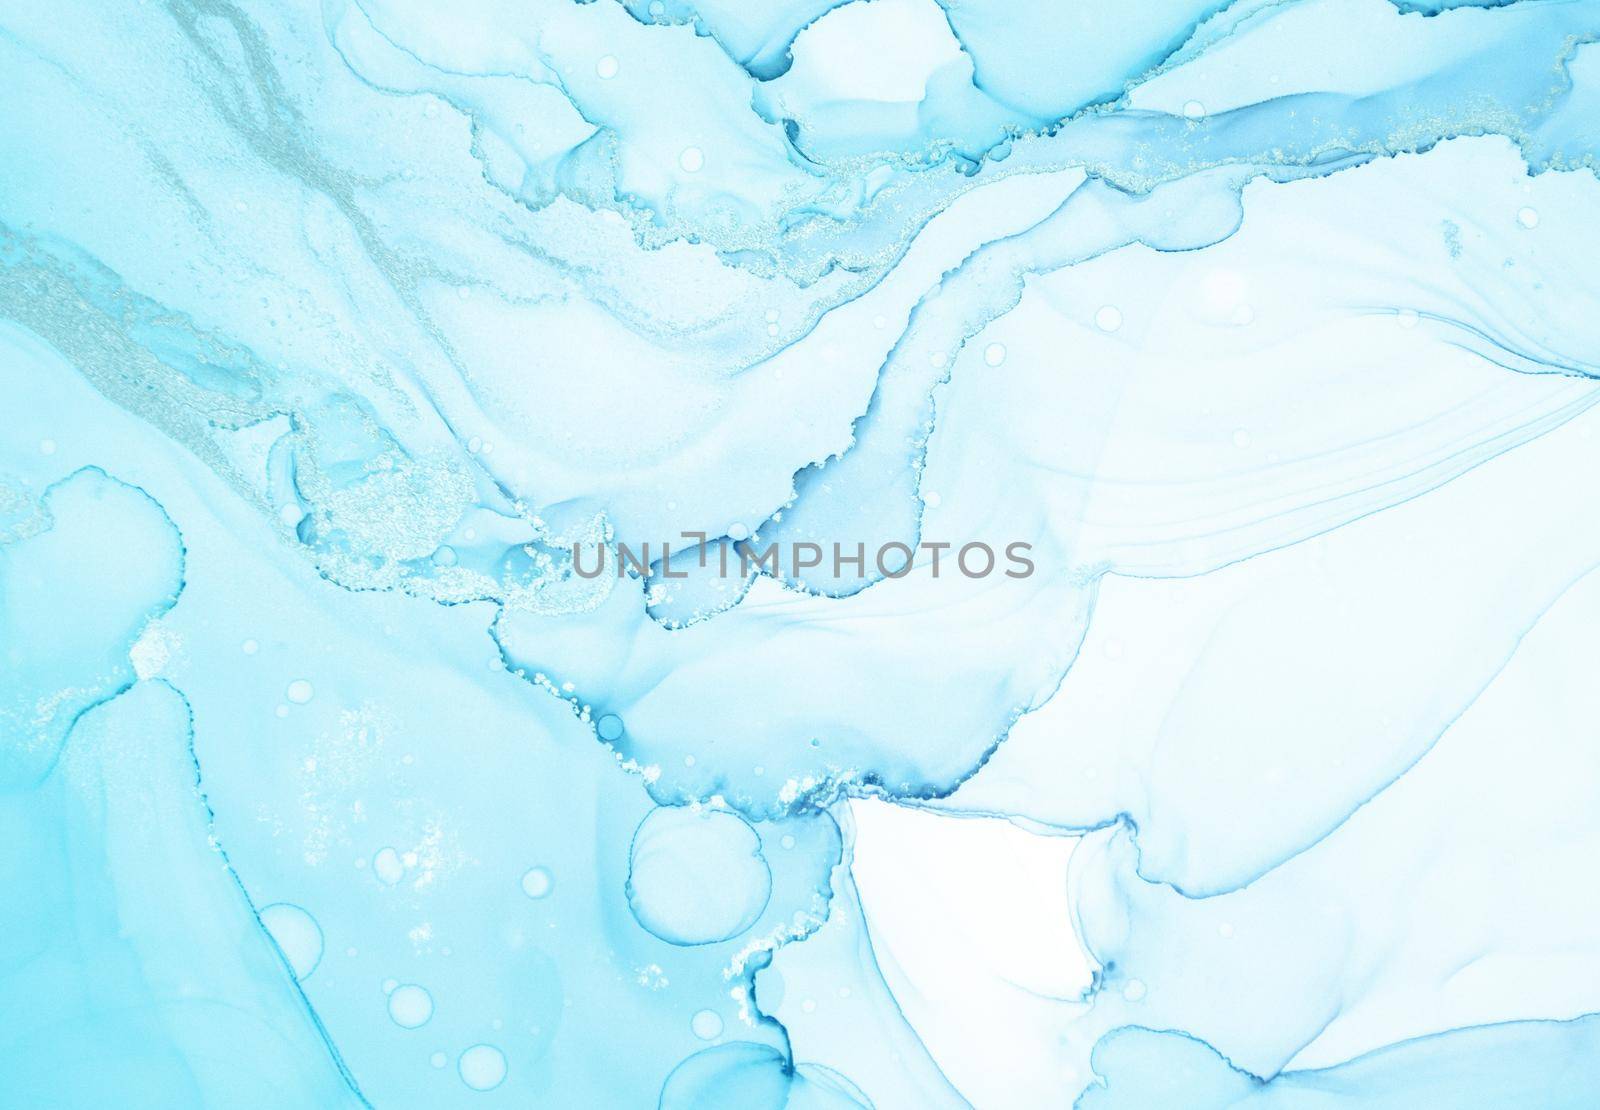 Ink Colours Mix. Fluid Wave Background. Indigo Marble Paint. Ink Colours Mix Water. Airy Light Print. Blue Art Texture. Watercolor Creative Splash. Oil Alcohol Design. Abstract Mixing Inks.